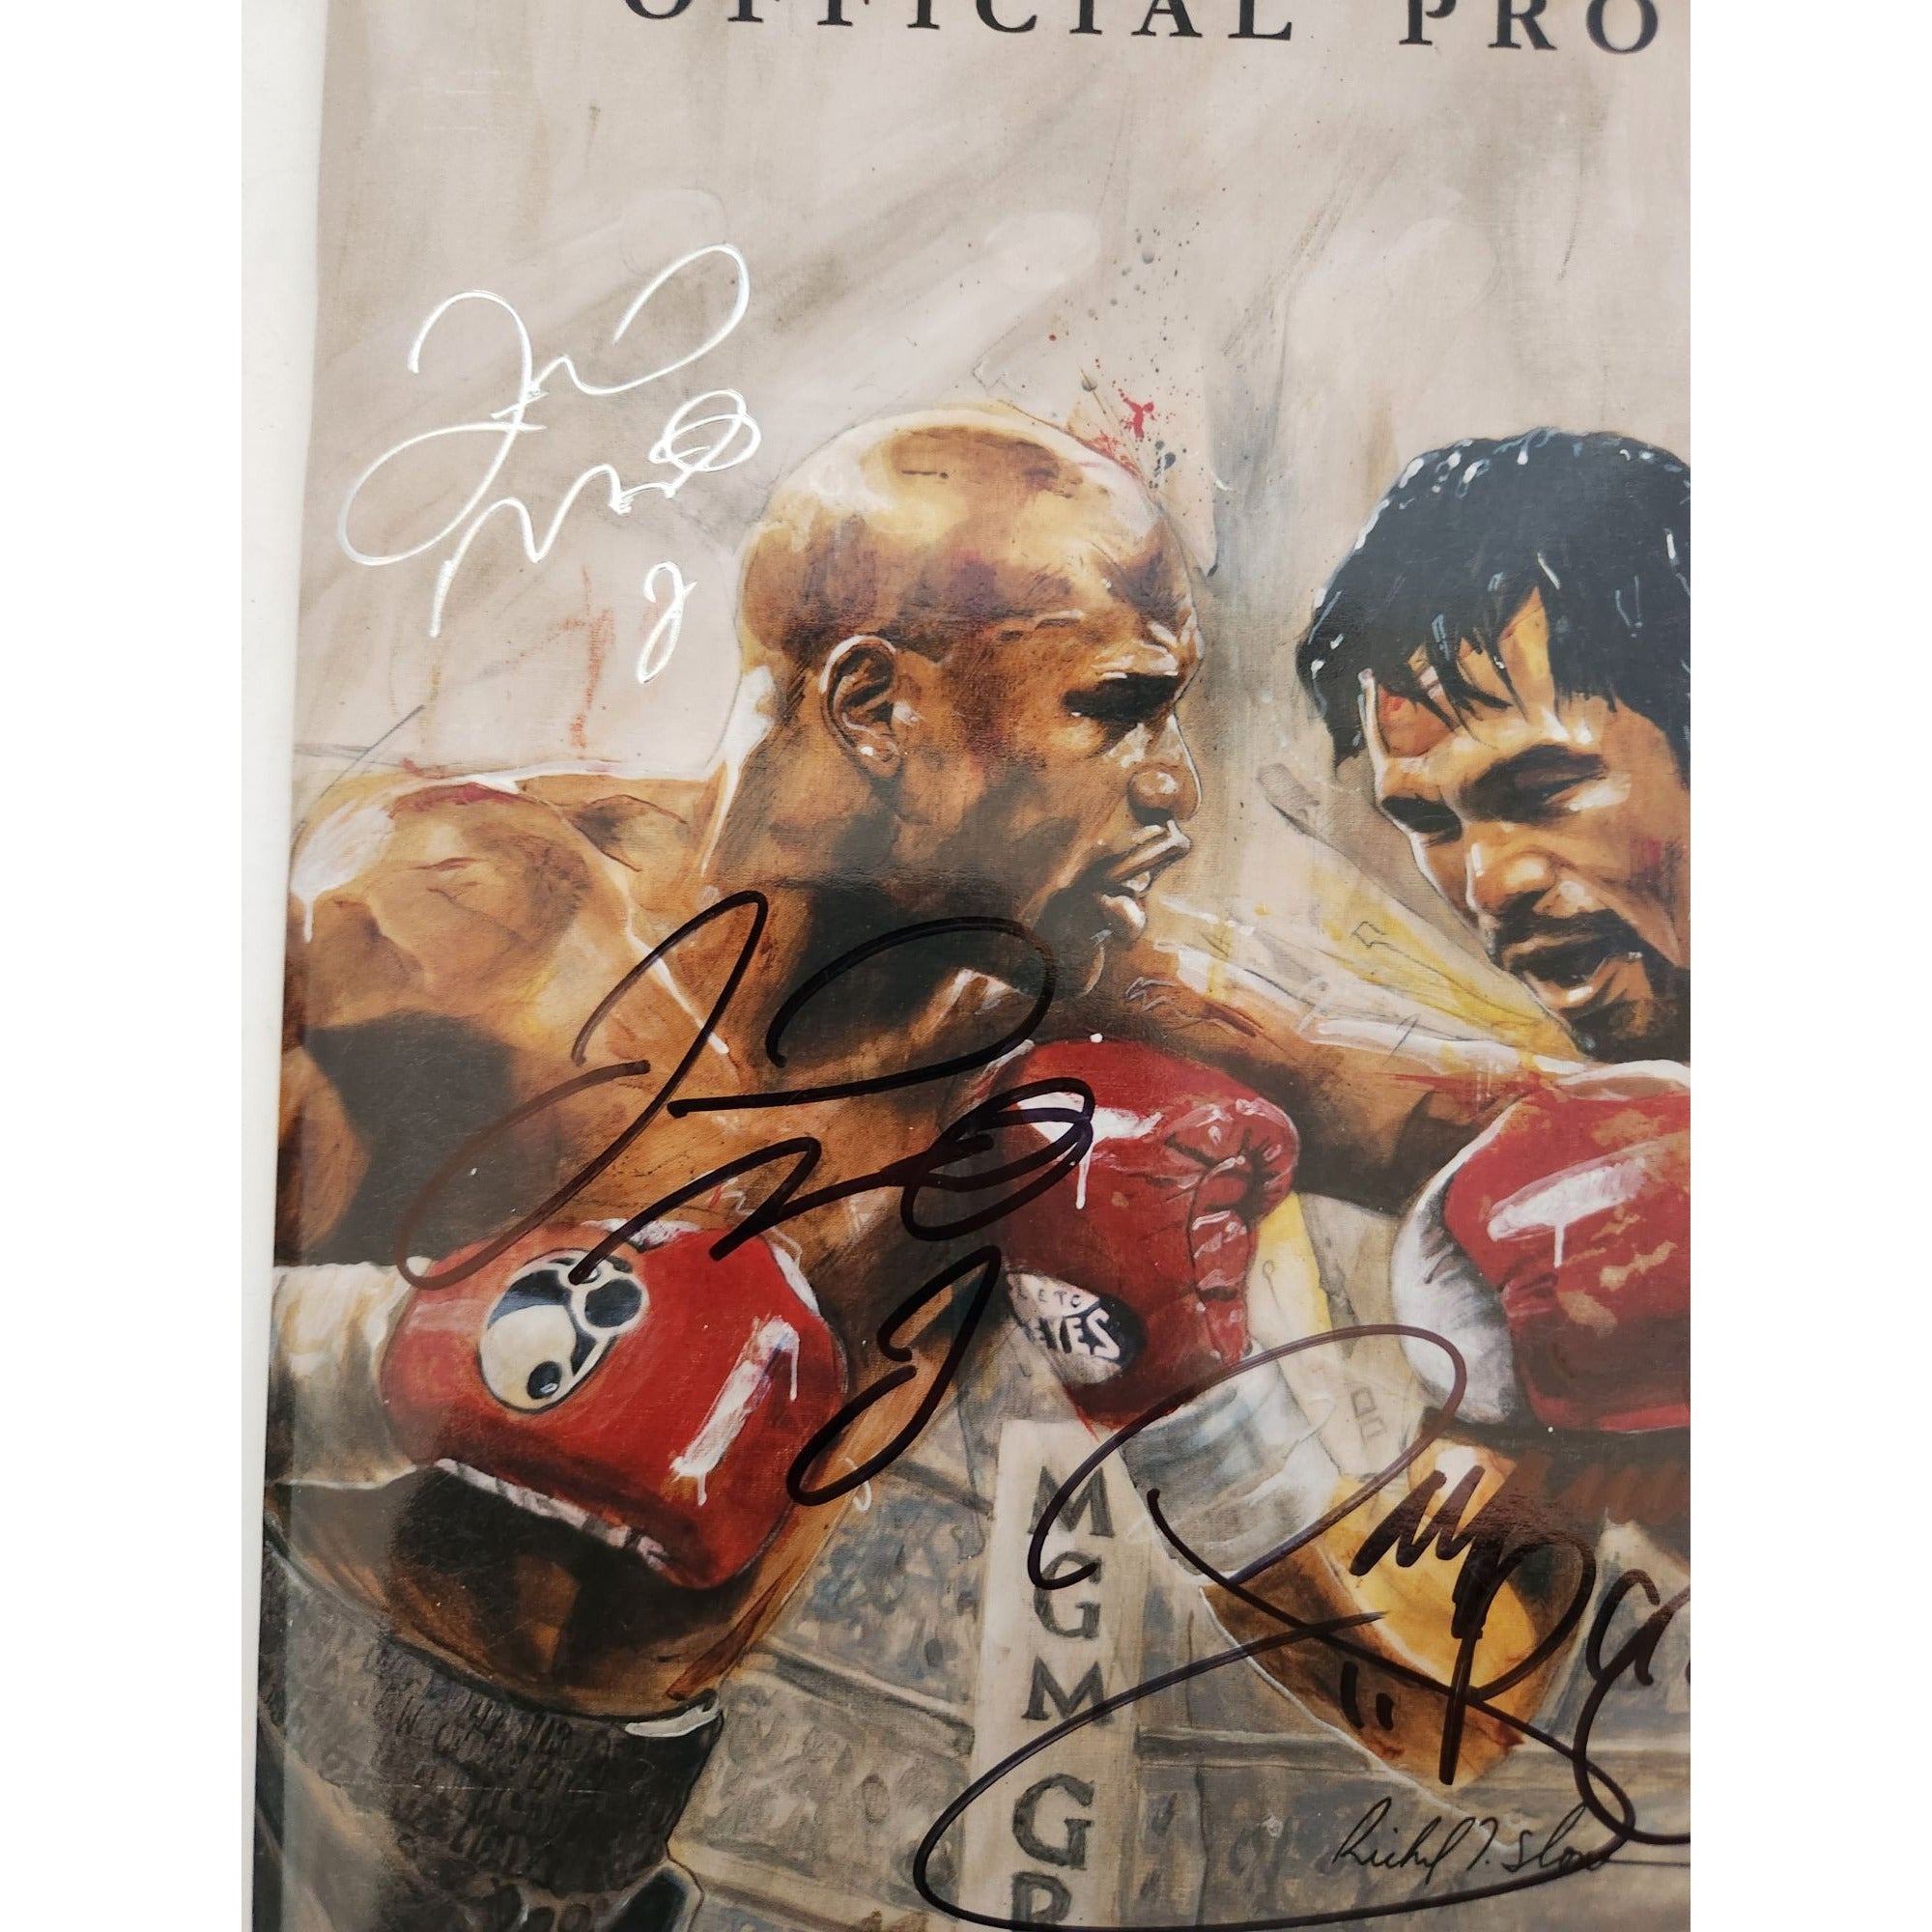 Manny Pacquiao and Floyd Mayweather Jr original full fight program May 2nd 2015 signed with proof